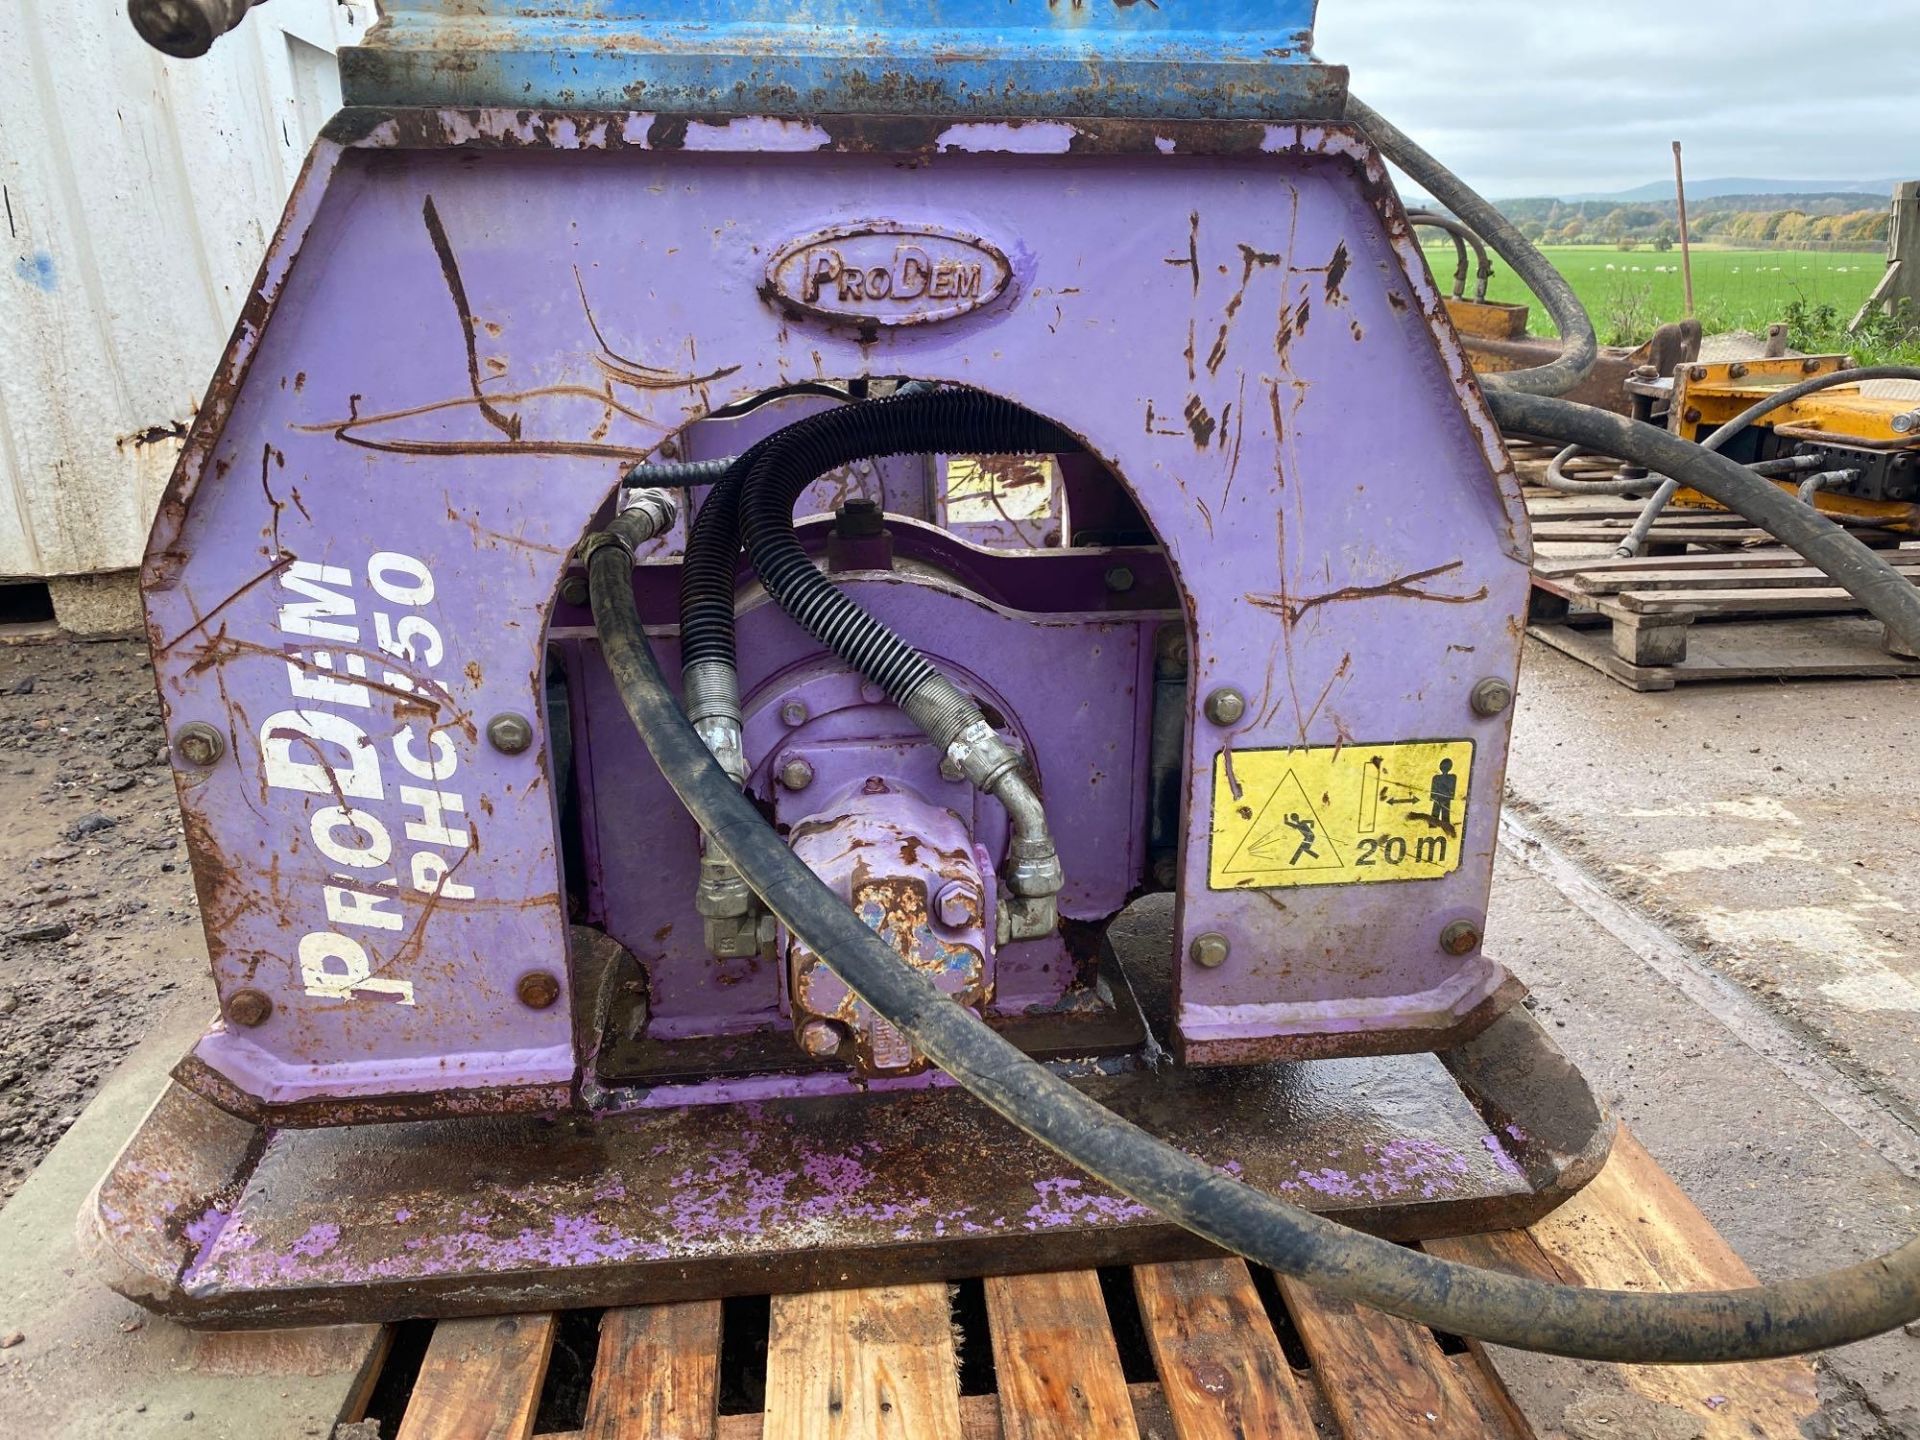 Pro Dem PHC150 excavator whacker plate date of manufacture 2015 - Image 3 of 4